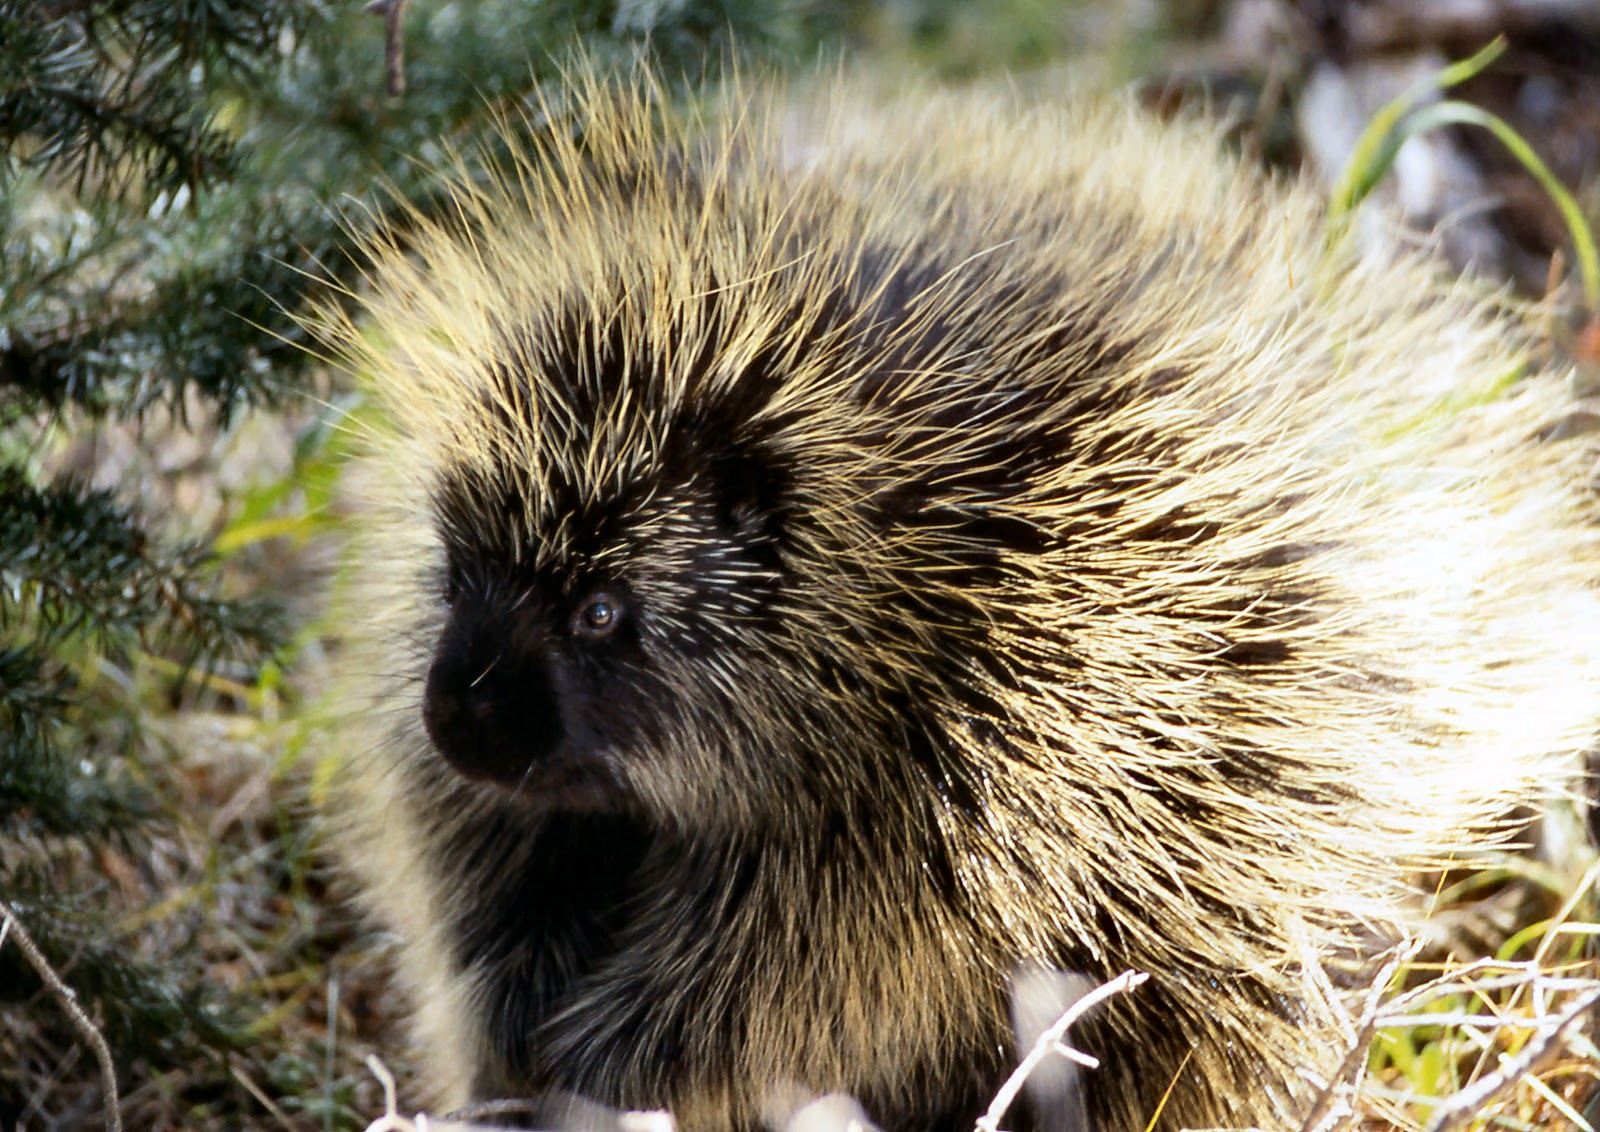 ENCYCLOPEDIA OF ANIMAL FACTS AND PICTURES: PORCUPINE